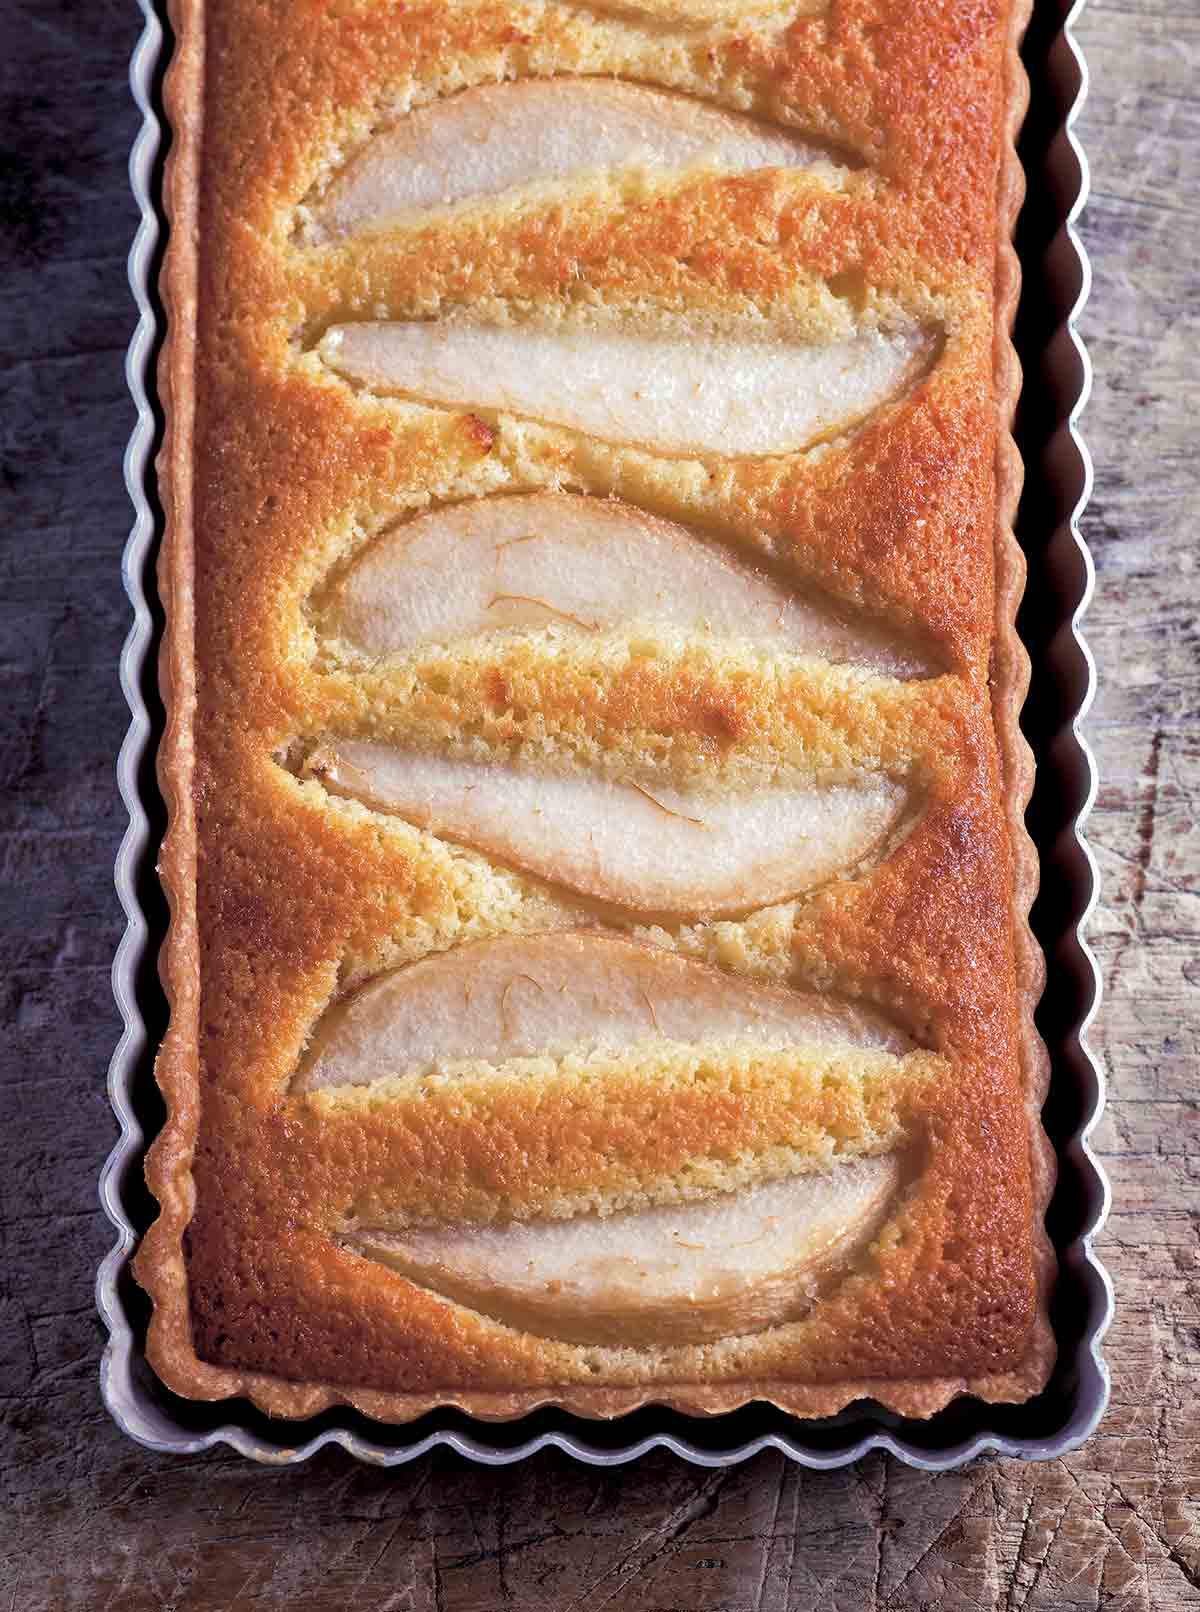 A rectangular tart with wedges of pear baked into it in a rectangular tart pan.